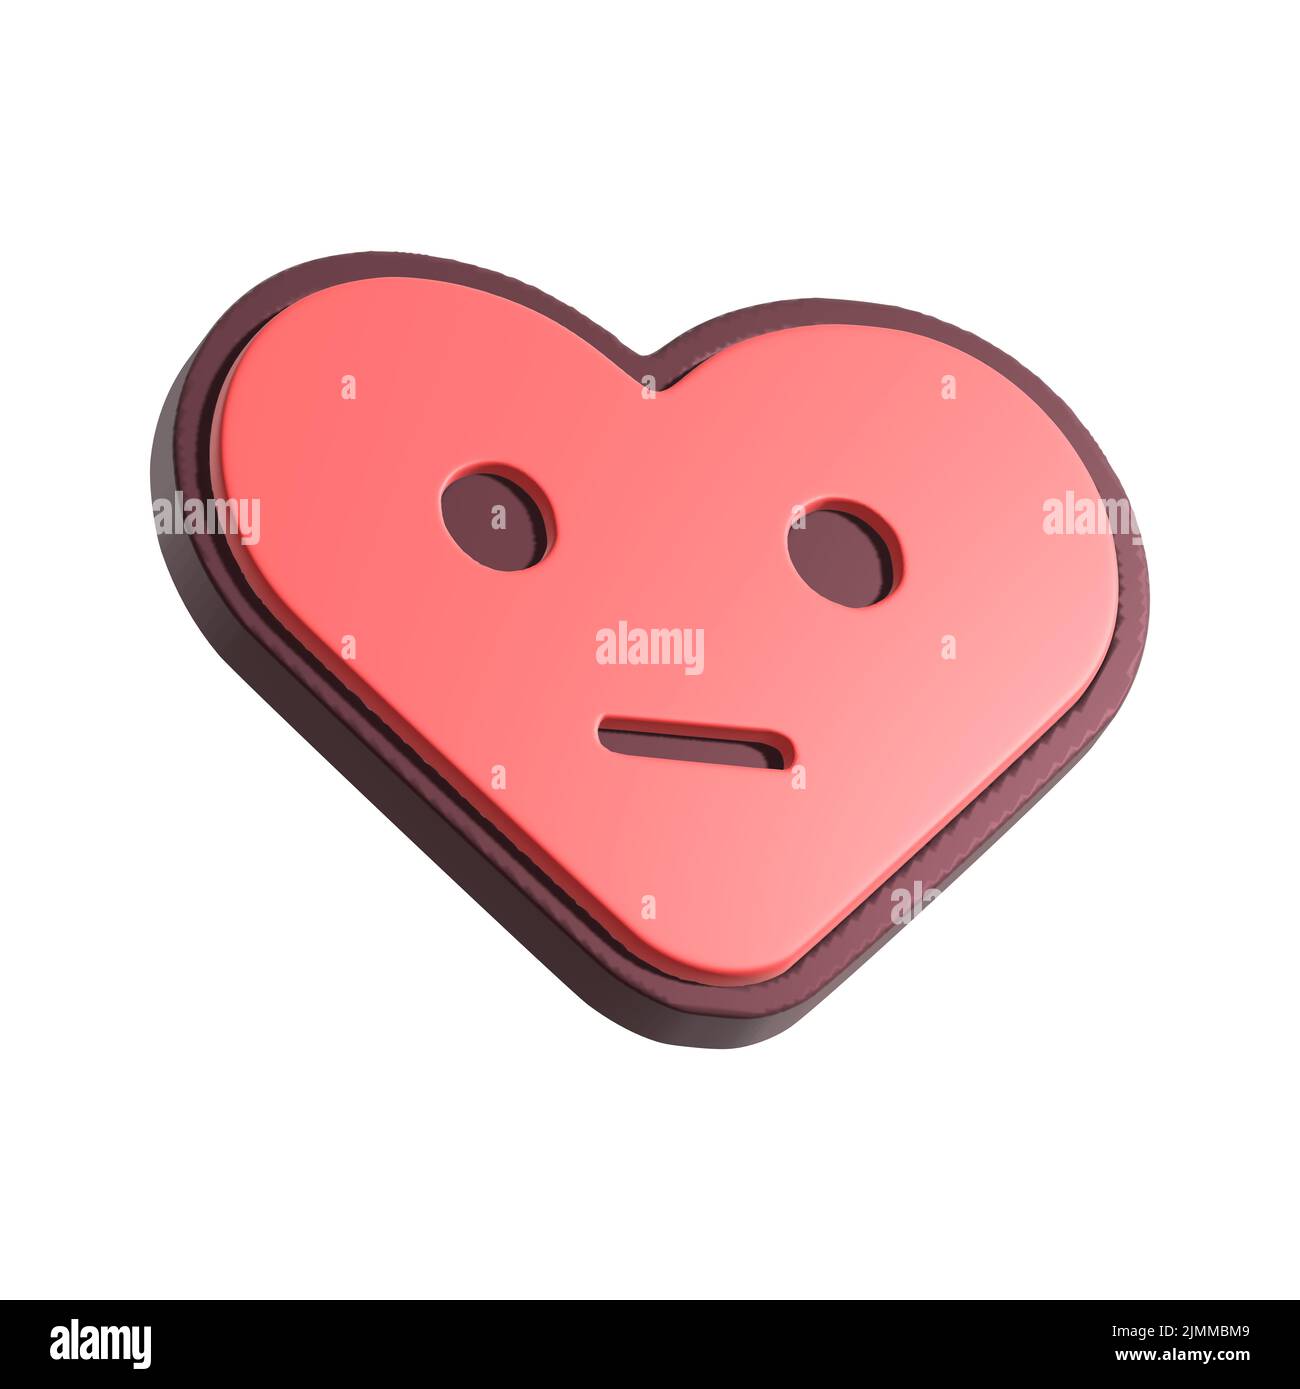 Emotionless heart smiley face 3d illustration. Cartoon heart character isolated on white background. Stock Photo